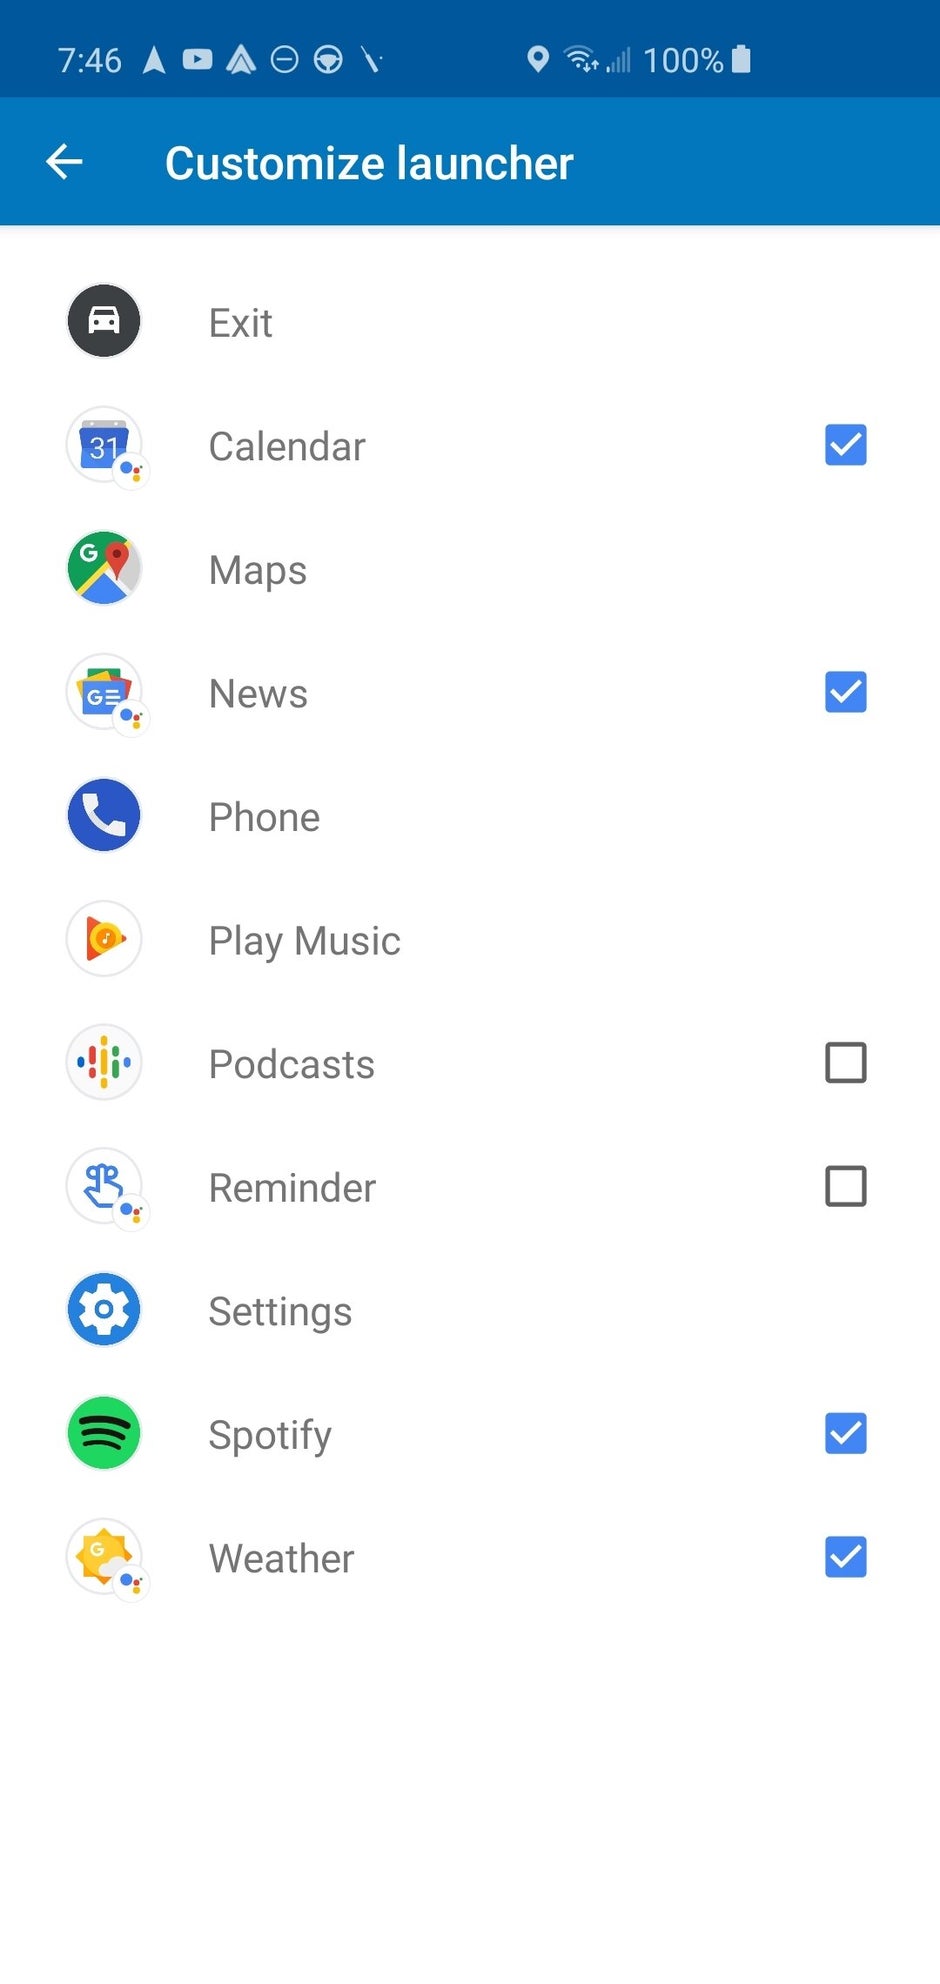 Android Auto now lets you customize your app drawer